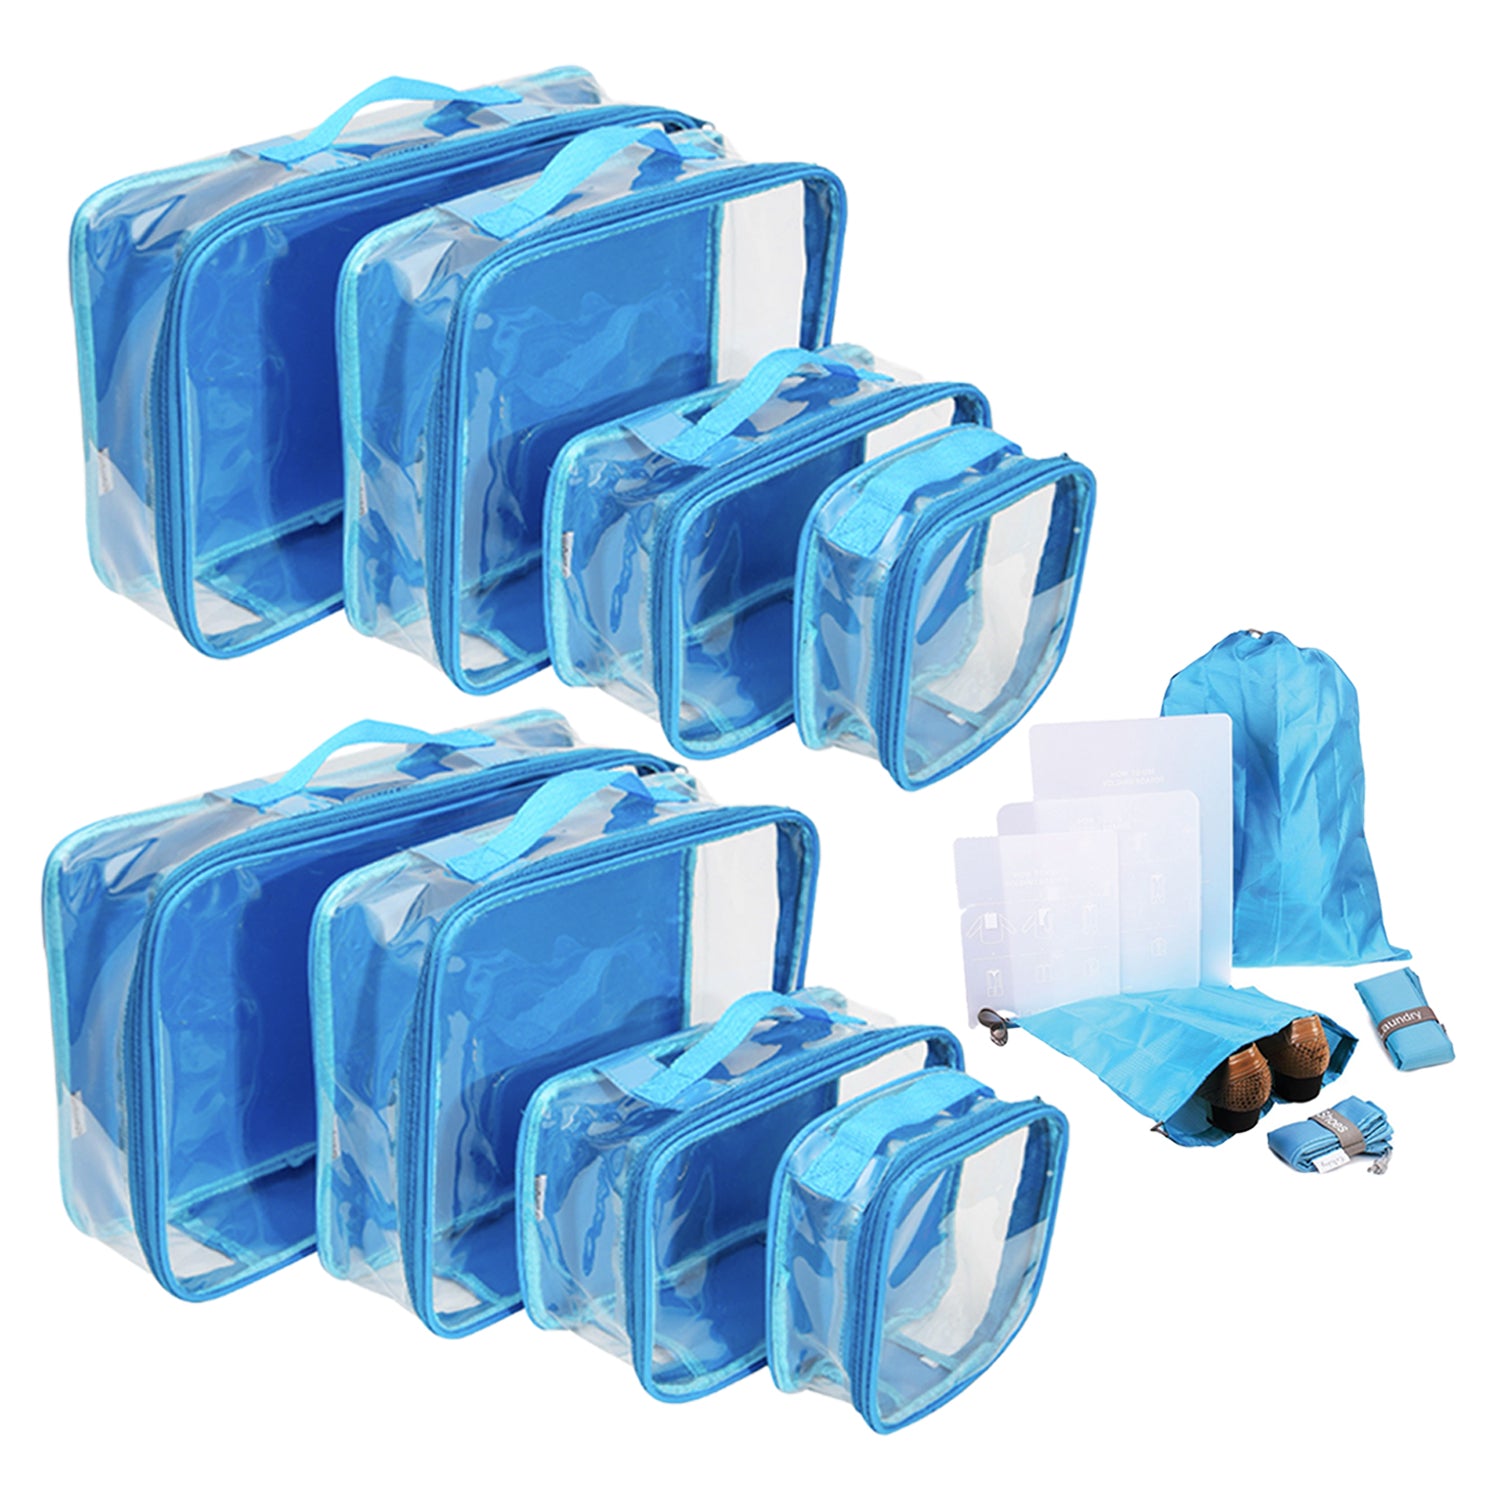 EzPacking Clear Packing Cubes Set of 4 / Packs 7-10 Days of Clothes/Premium PVC Plastic Storage Cube